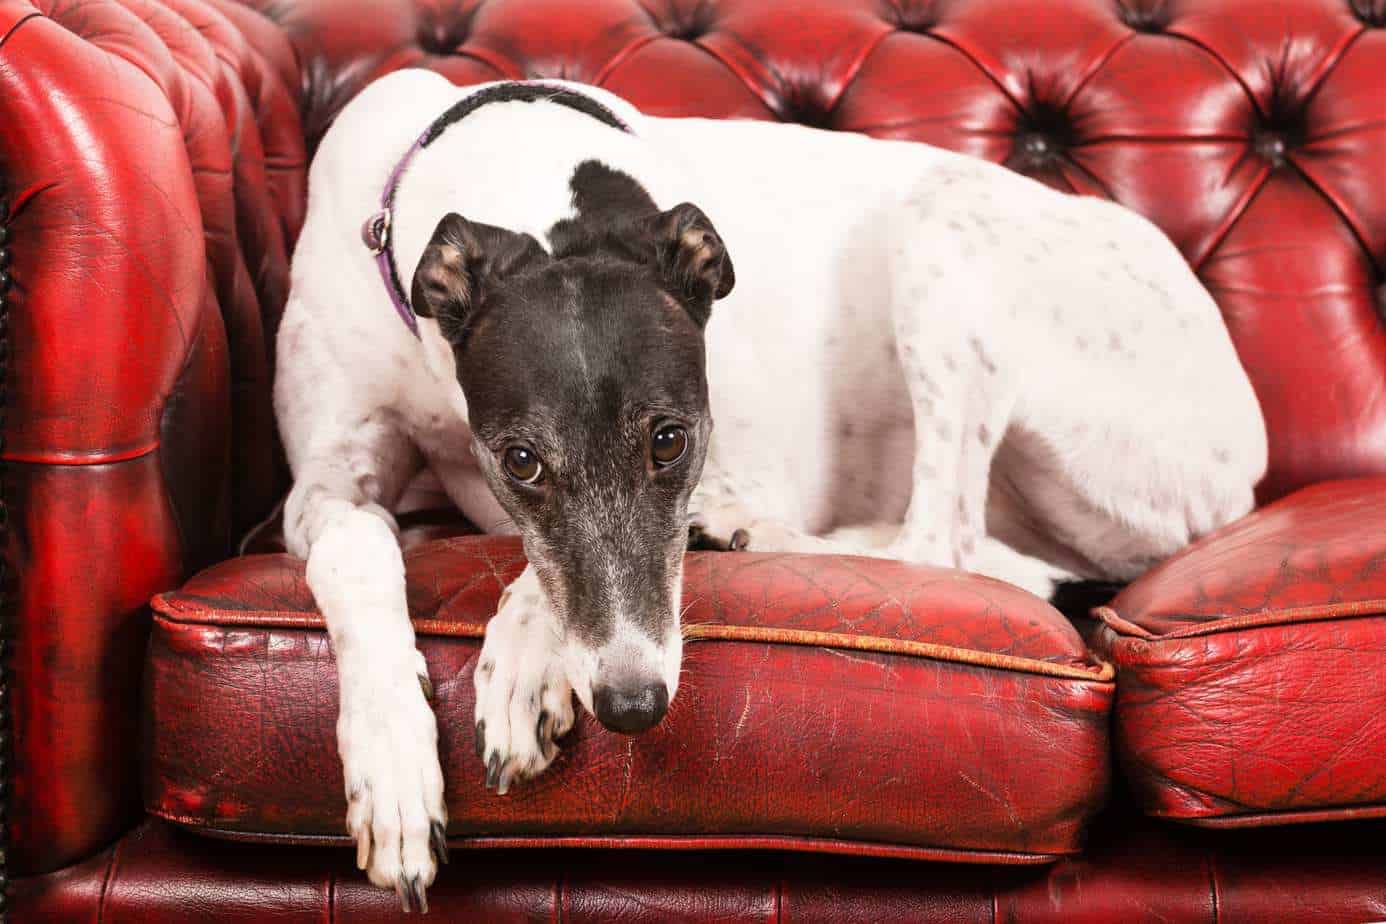 greyhound rests on couch. Letting your dog on furniture won't make him more aggressive. Make sure your dog is well-trained and furniture is big enough for everyone to be comfortable.